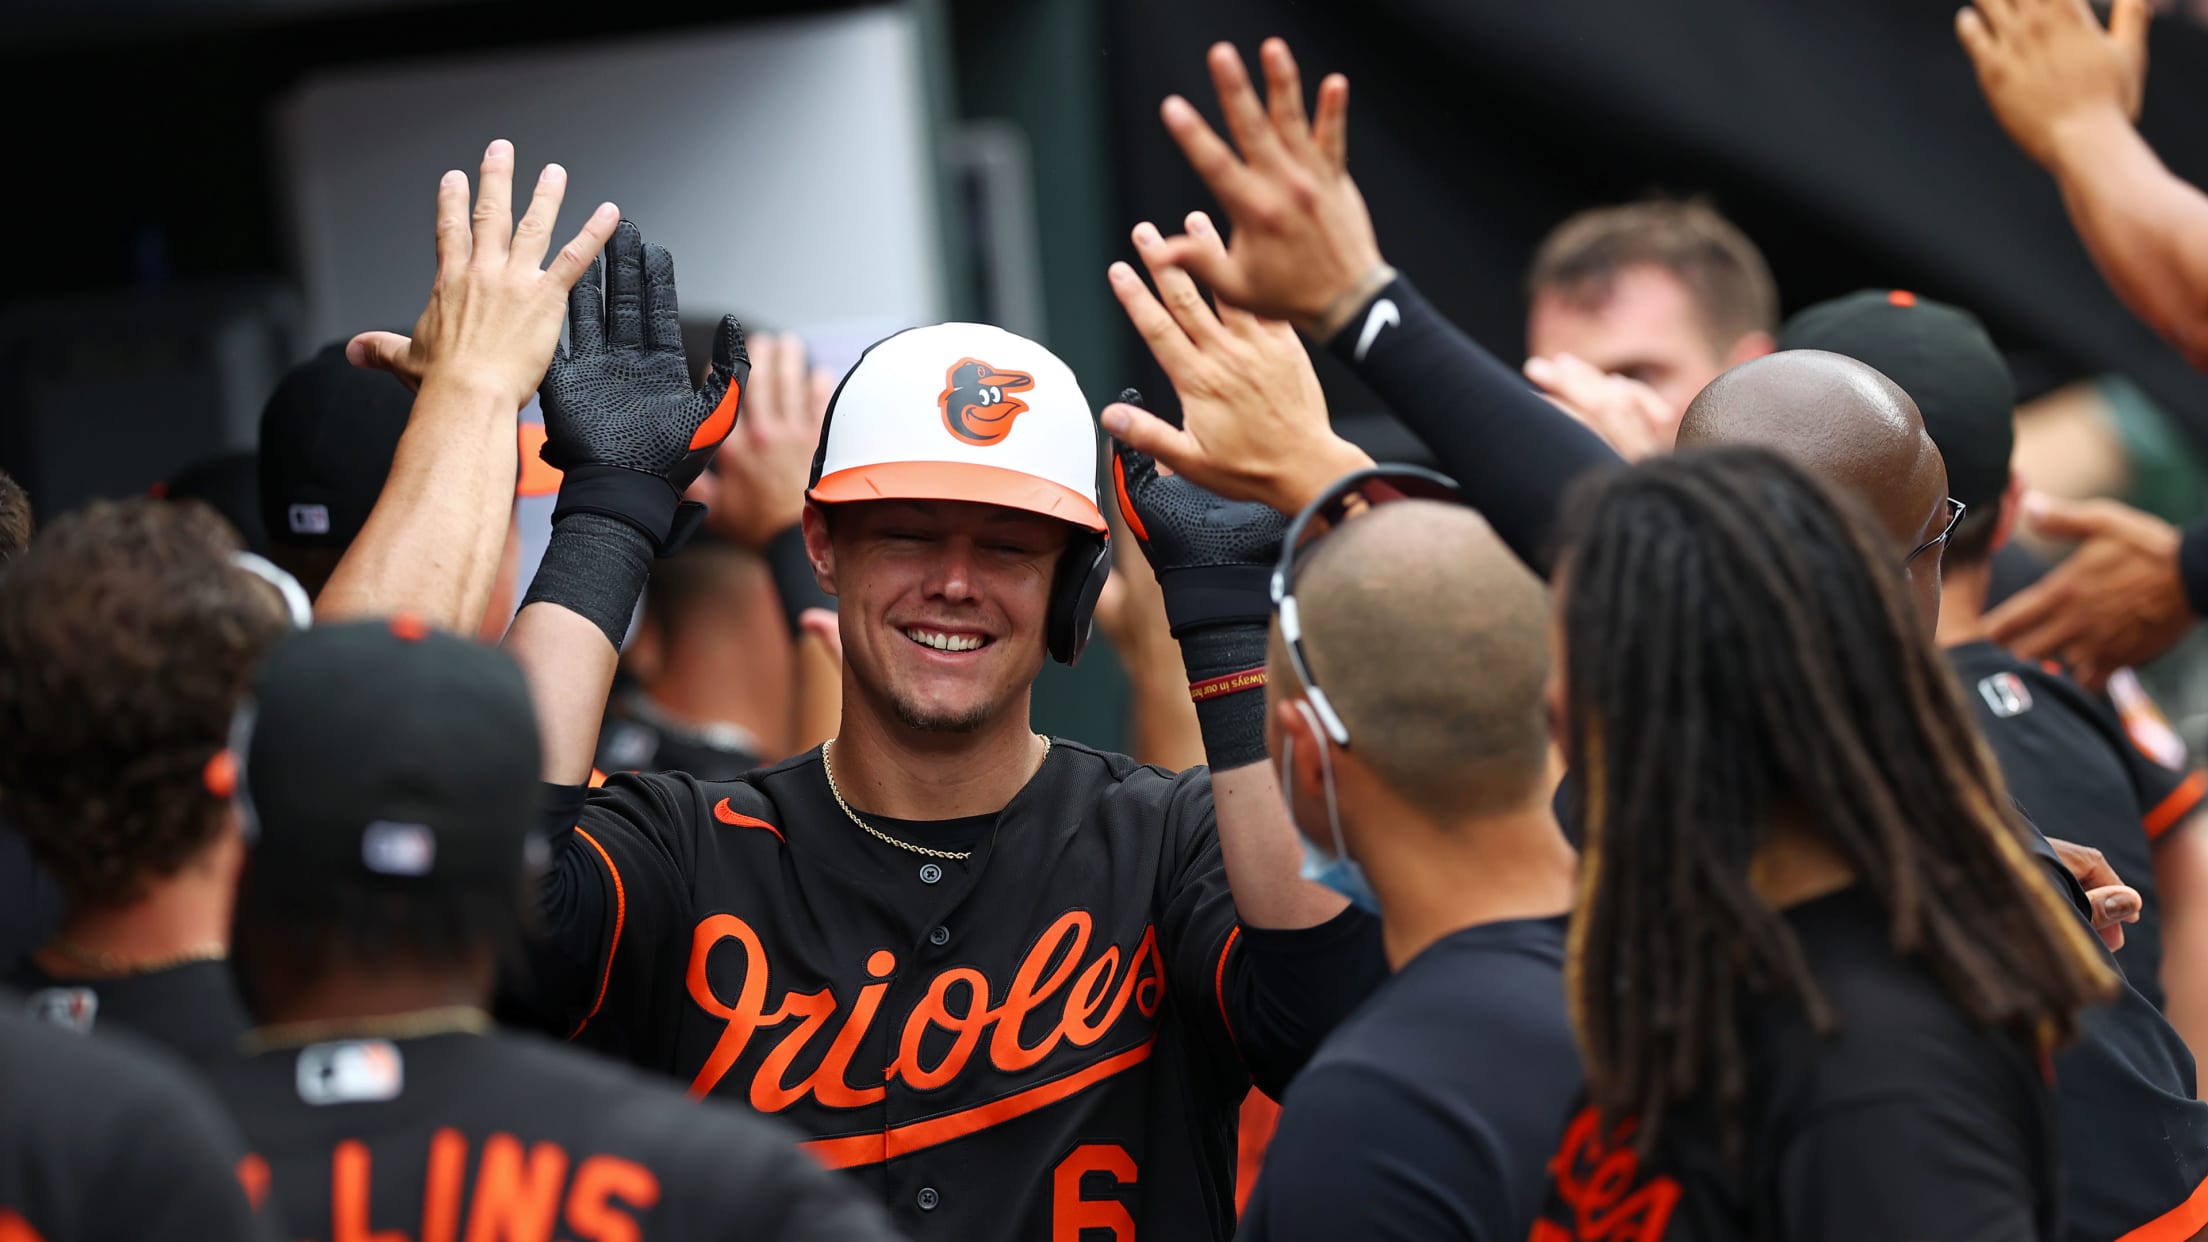 Orioles Weekly Wrap Up: Mountcastle shines, Irvin sent down